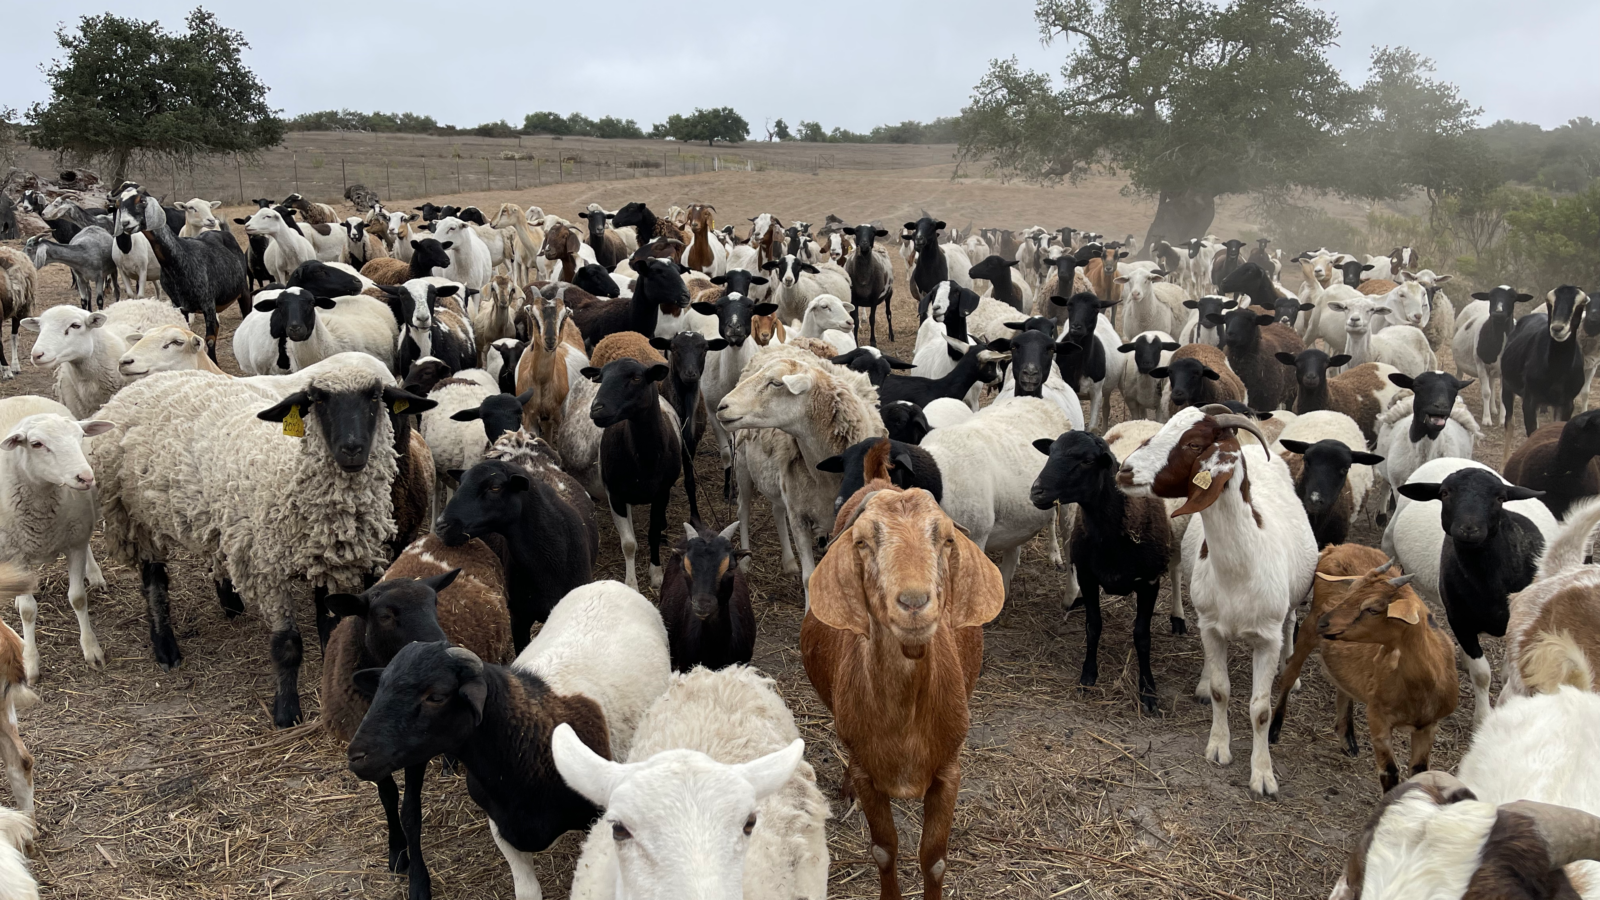 This is the image of a very large group of sheep and goats. The goats are of all shapes and sizes and colors including dark tan, white, and black and white. The image is in keeping with our sustainable wine company's blog post about what we do every day, not just on earth day, to reduce our carbon foot print, including using sheep and goats to mow (eat) grass vs. using gas-fueled vehicles.